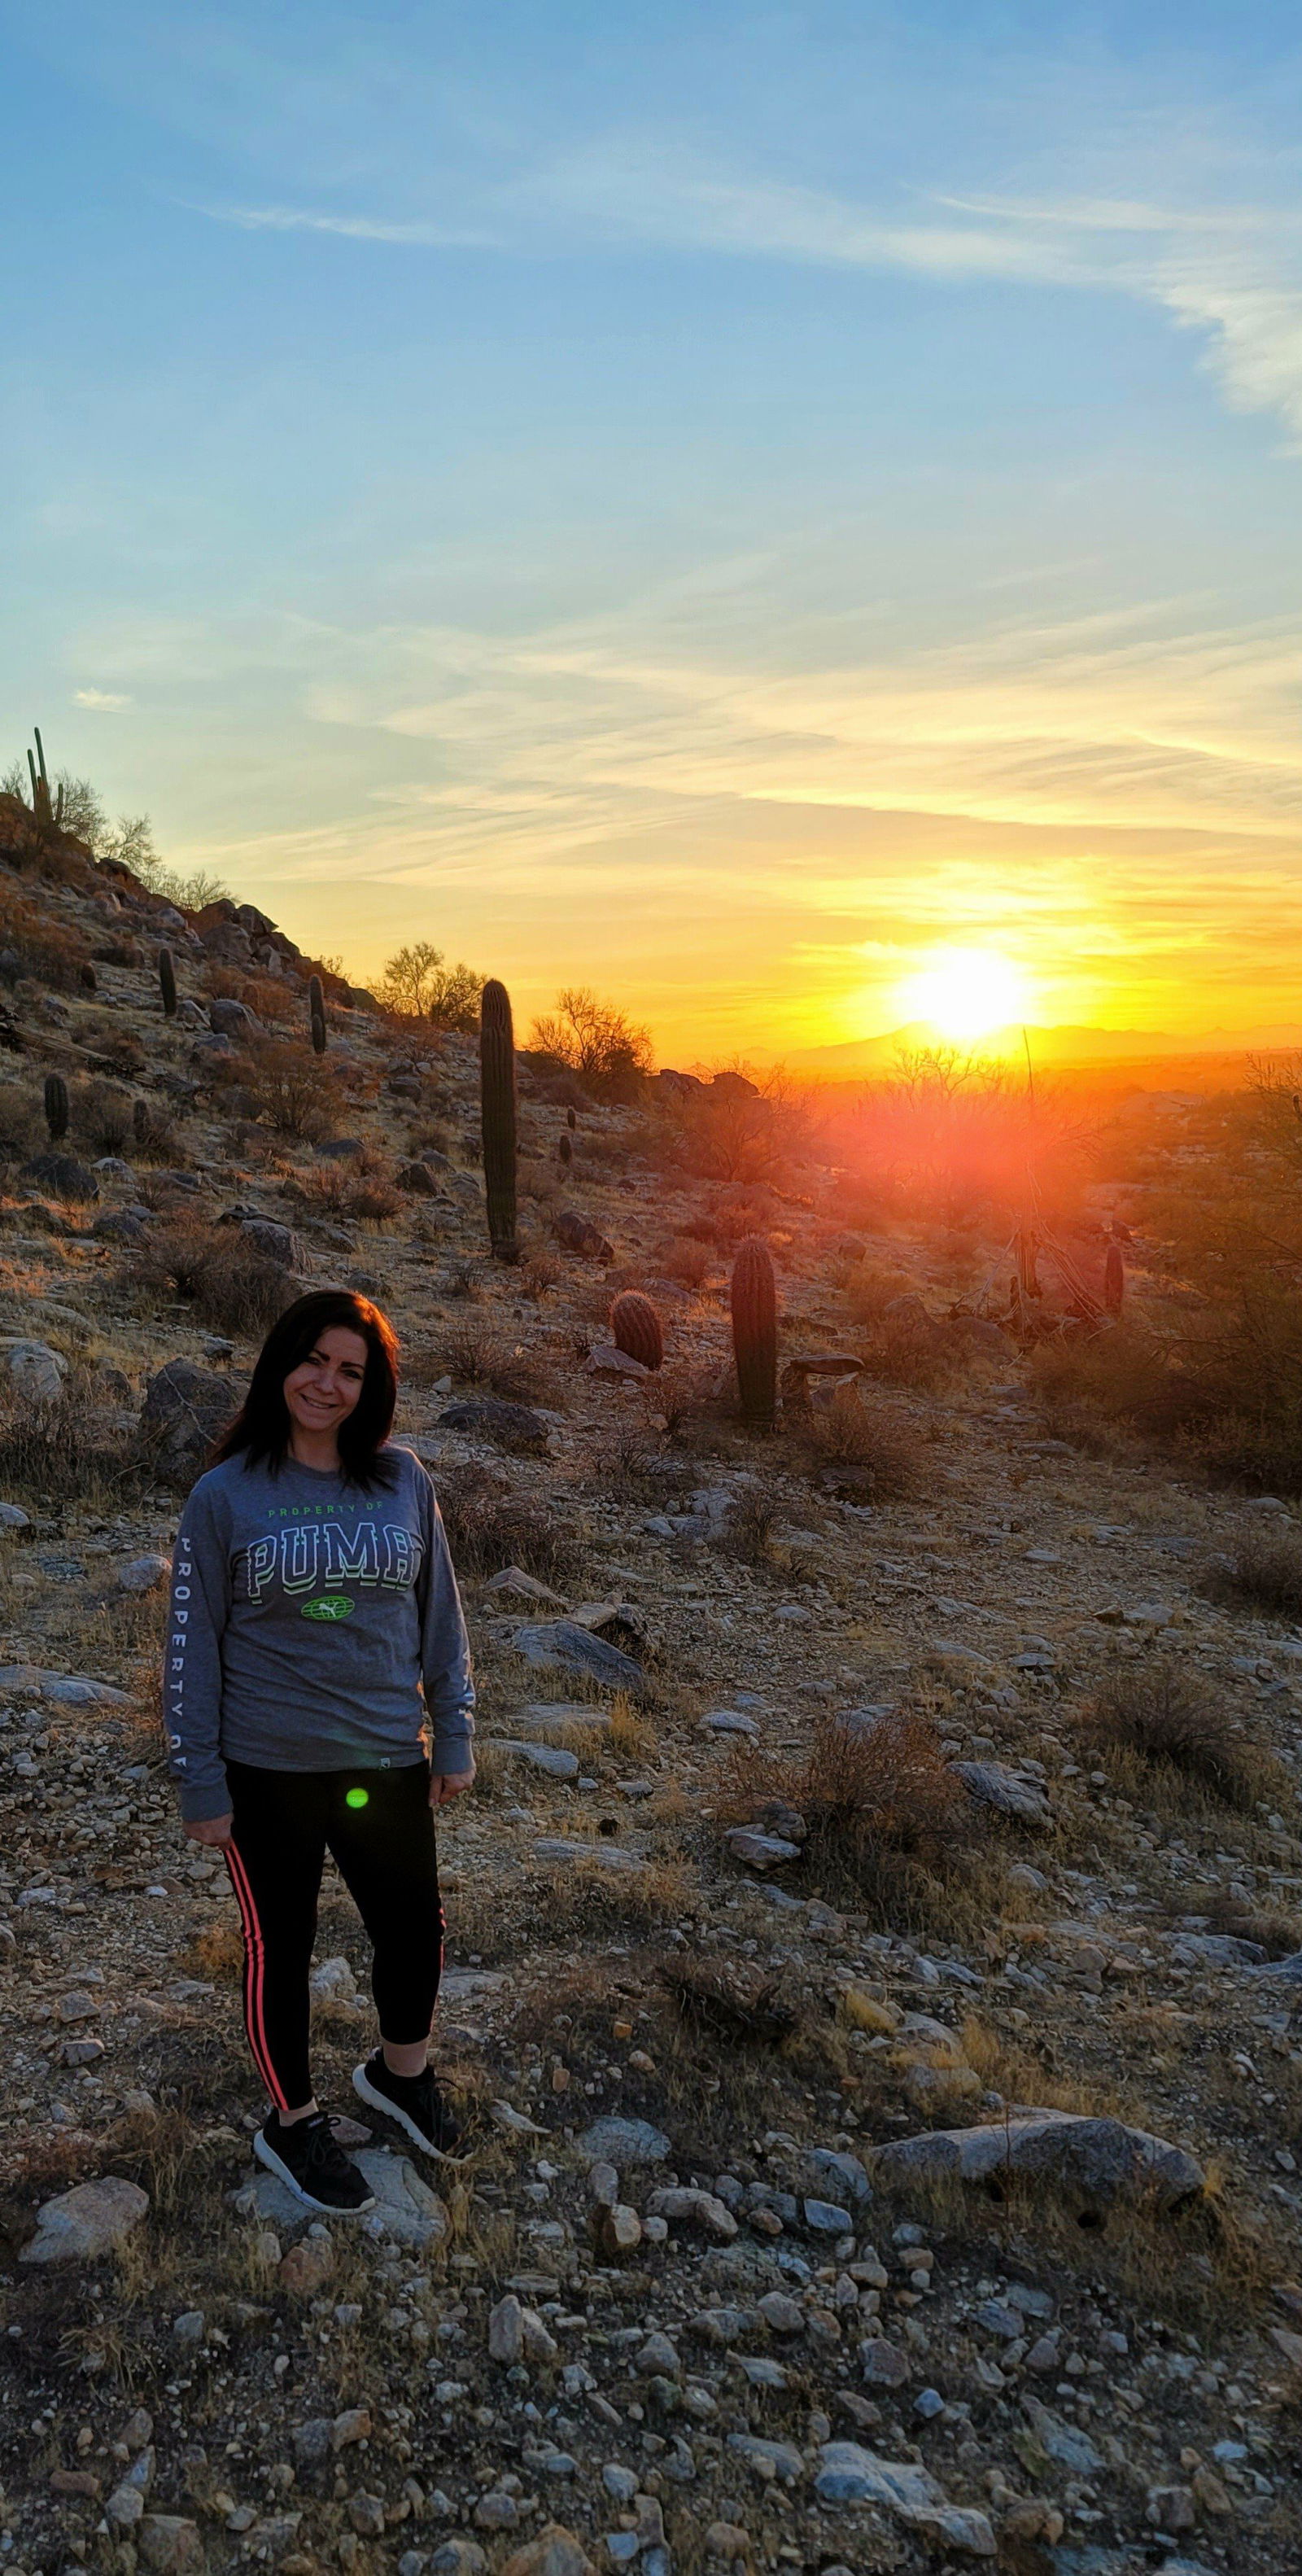 Photo by Sixfive with the username @Sixfive, who is a verified user,  February 10, 2023 at 5:41 PM. The post is about the topic Landscape scenery and the text says 'Arizona is a beautiful place especially with my wife @Blueeyes13 in it'